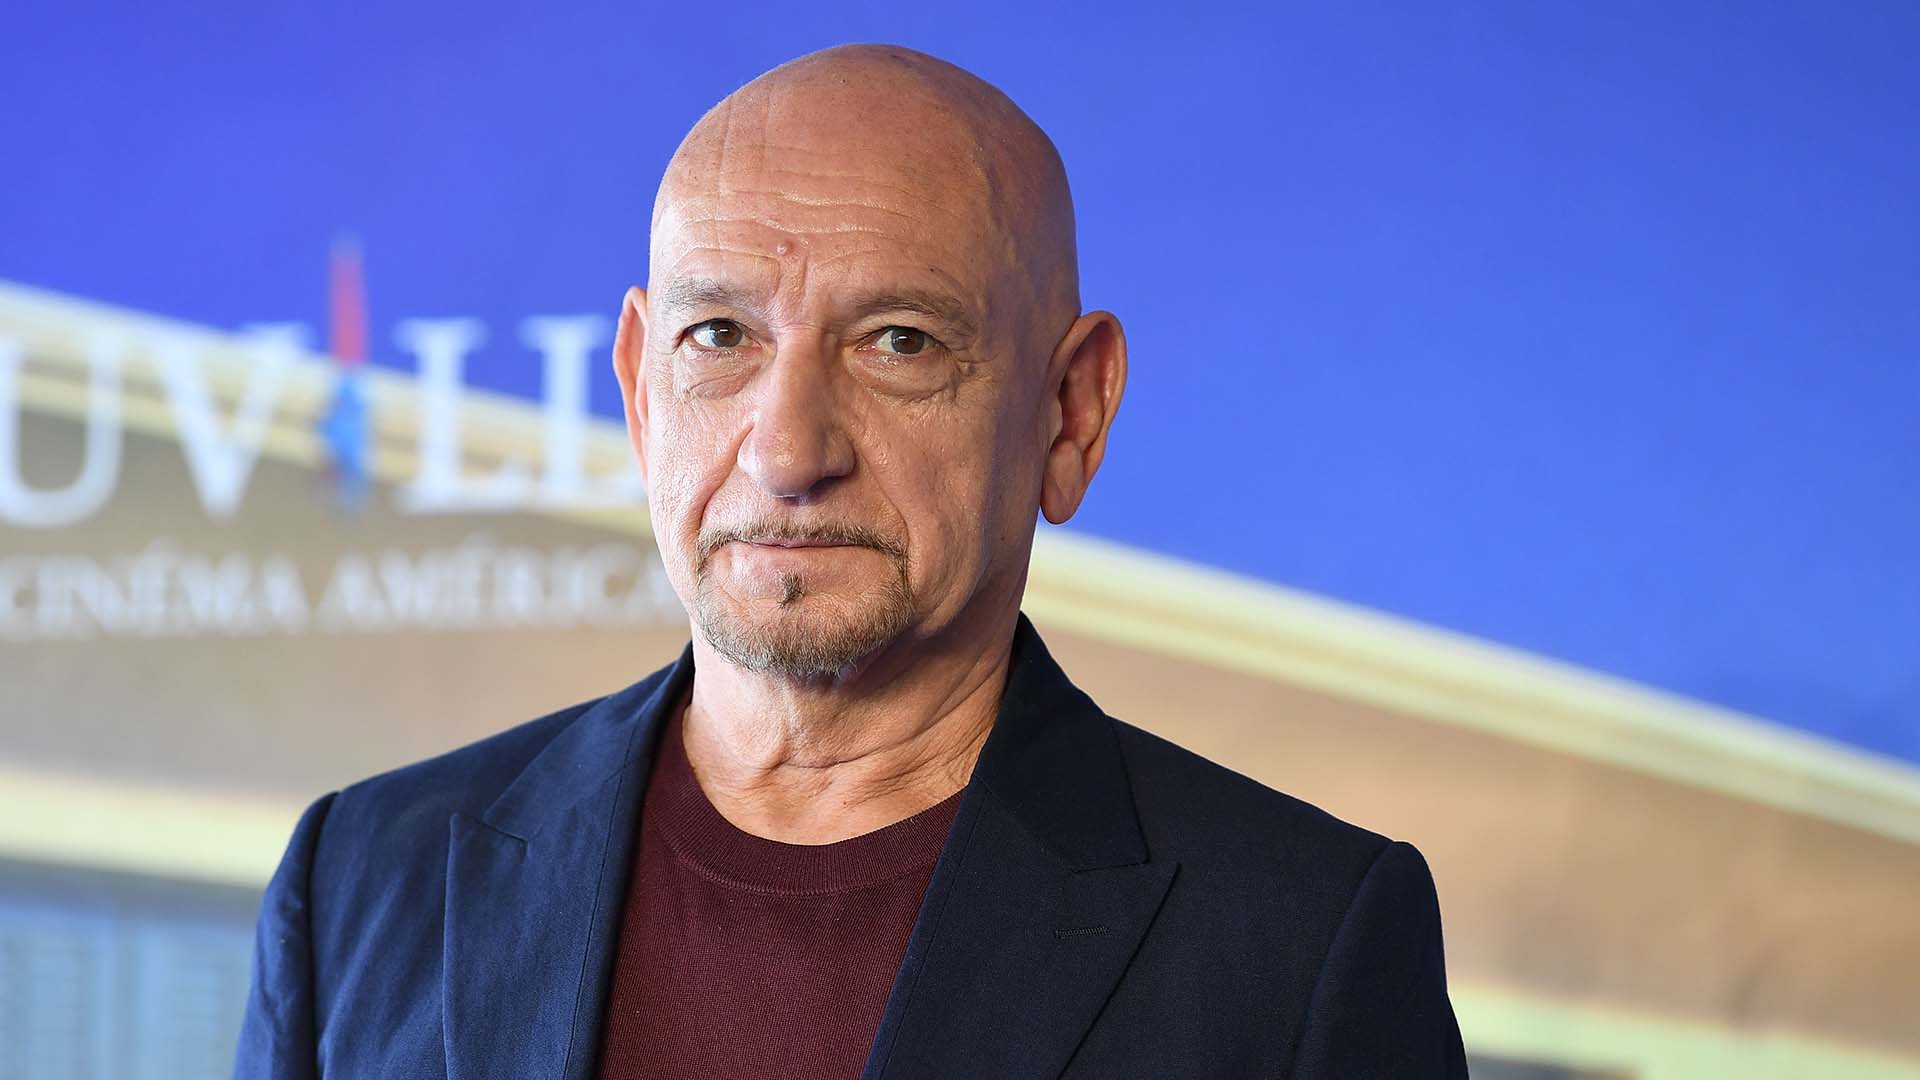 Casting News: Ben Kingsley to Star in ‘The School for Good and Evil’ Movie 